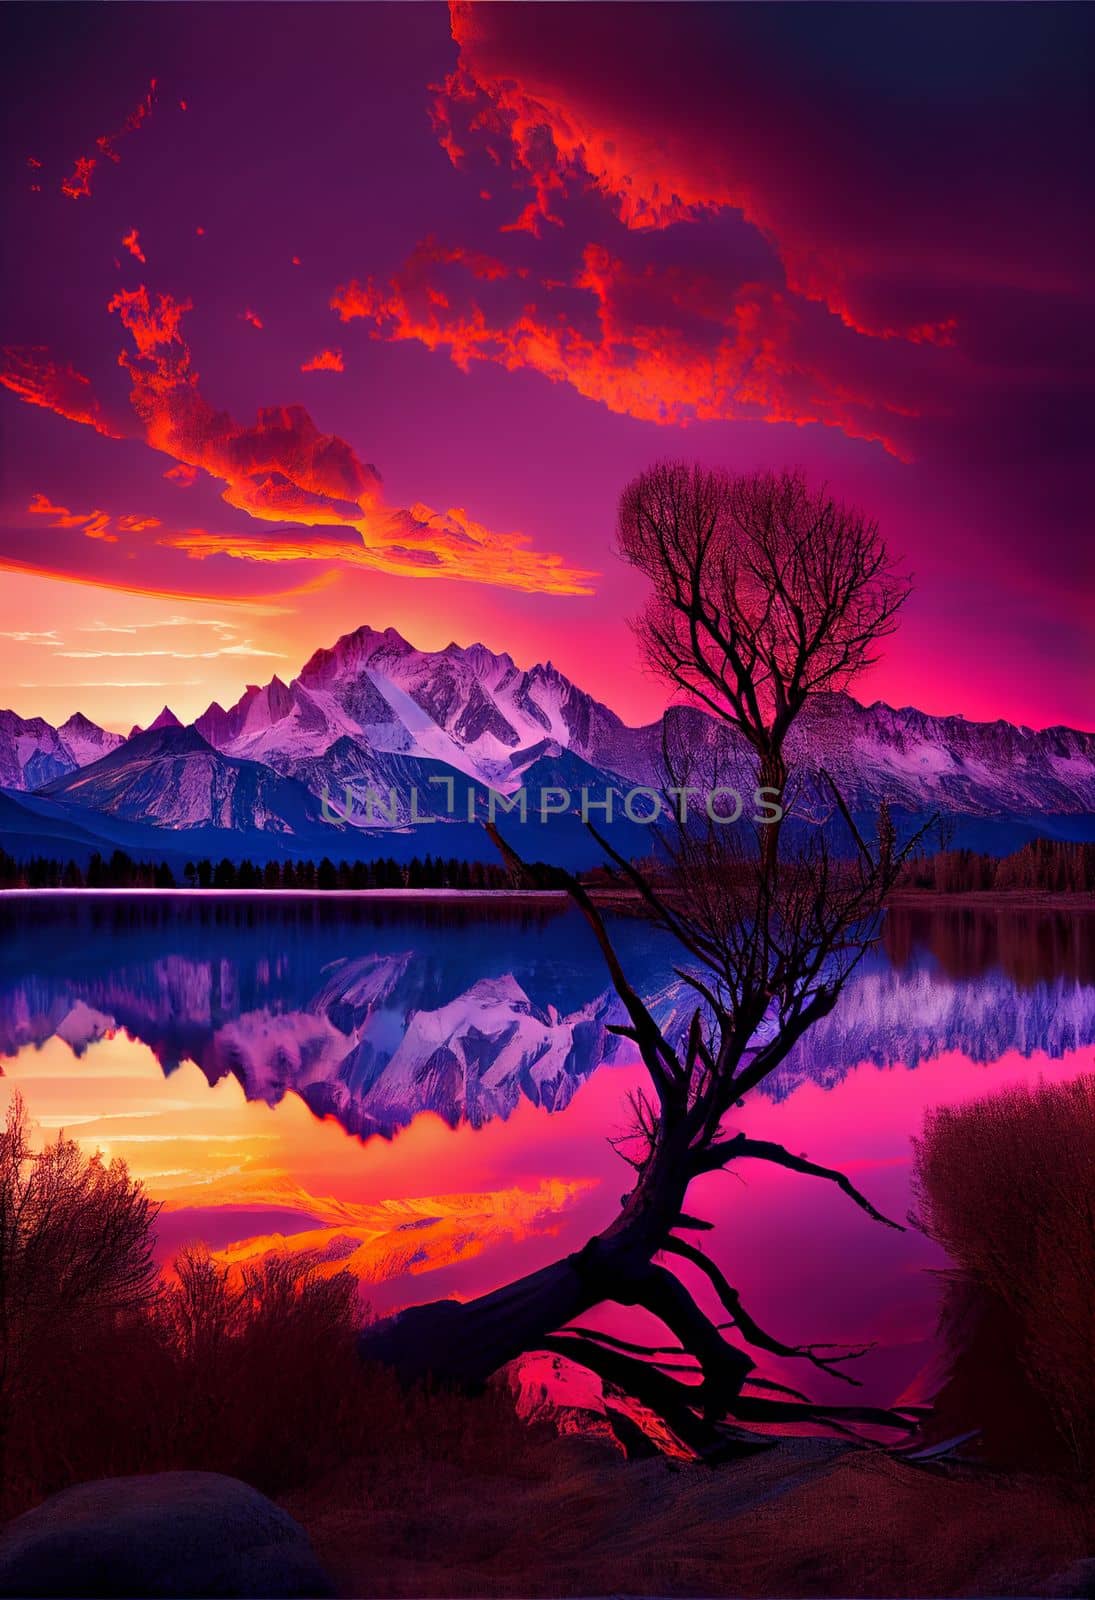 Majestic mountain range at sunrise with small lake and lone tree in foreground. by FokasuArt